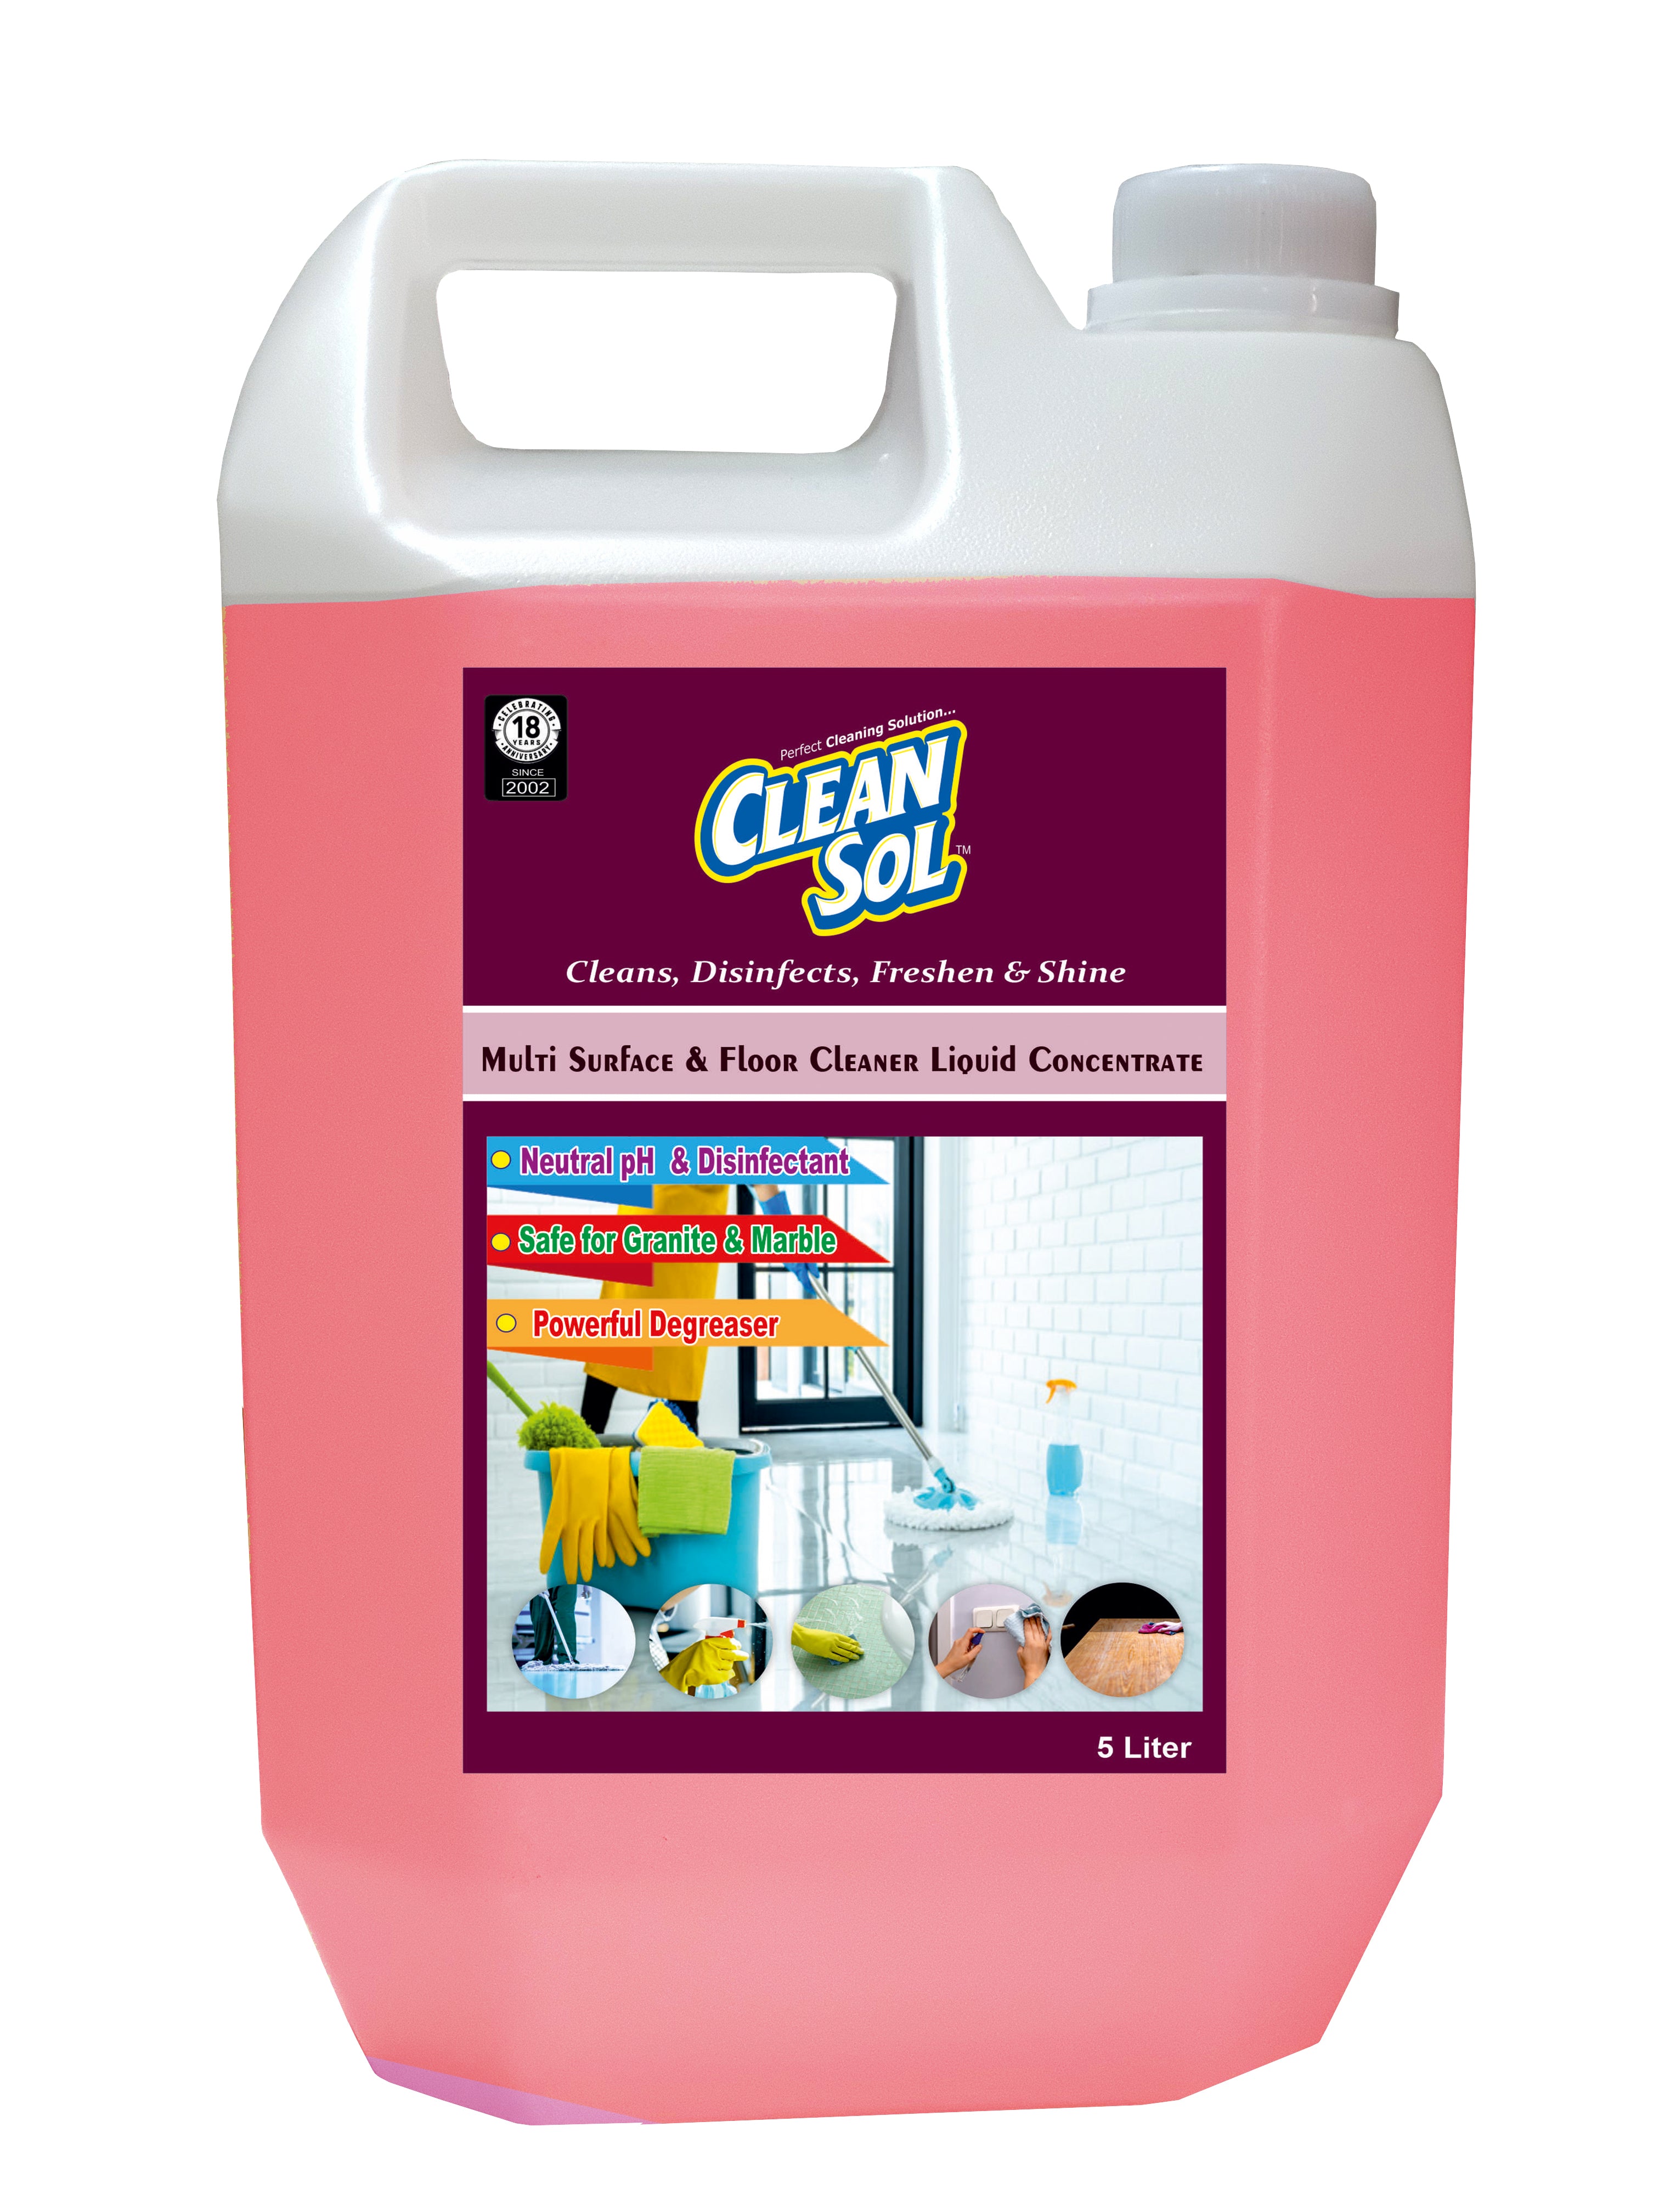 Cleansol Disinfectant Floor, Marble, and Granite Cleaner Liquid Concentrate - 5 Litre Removes Heavy Stains from Hard Surfaces